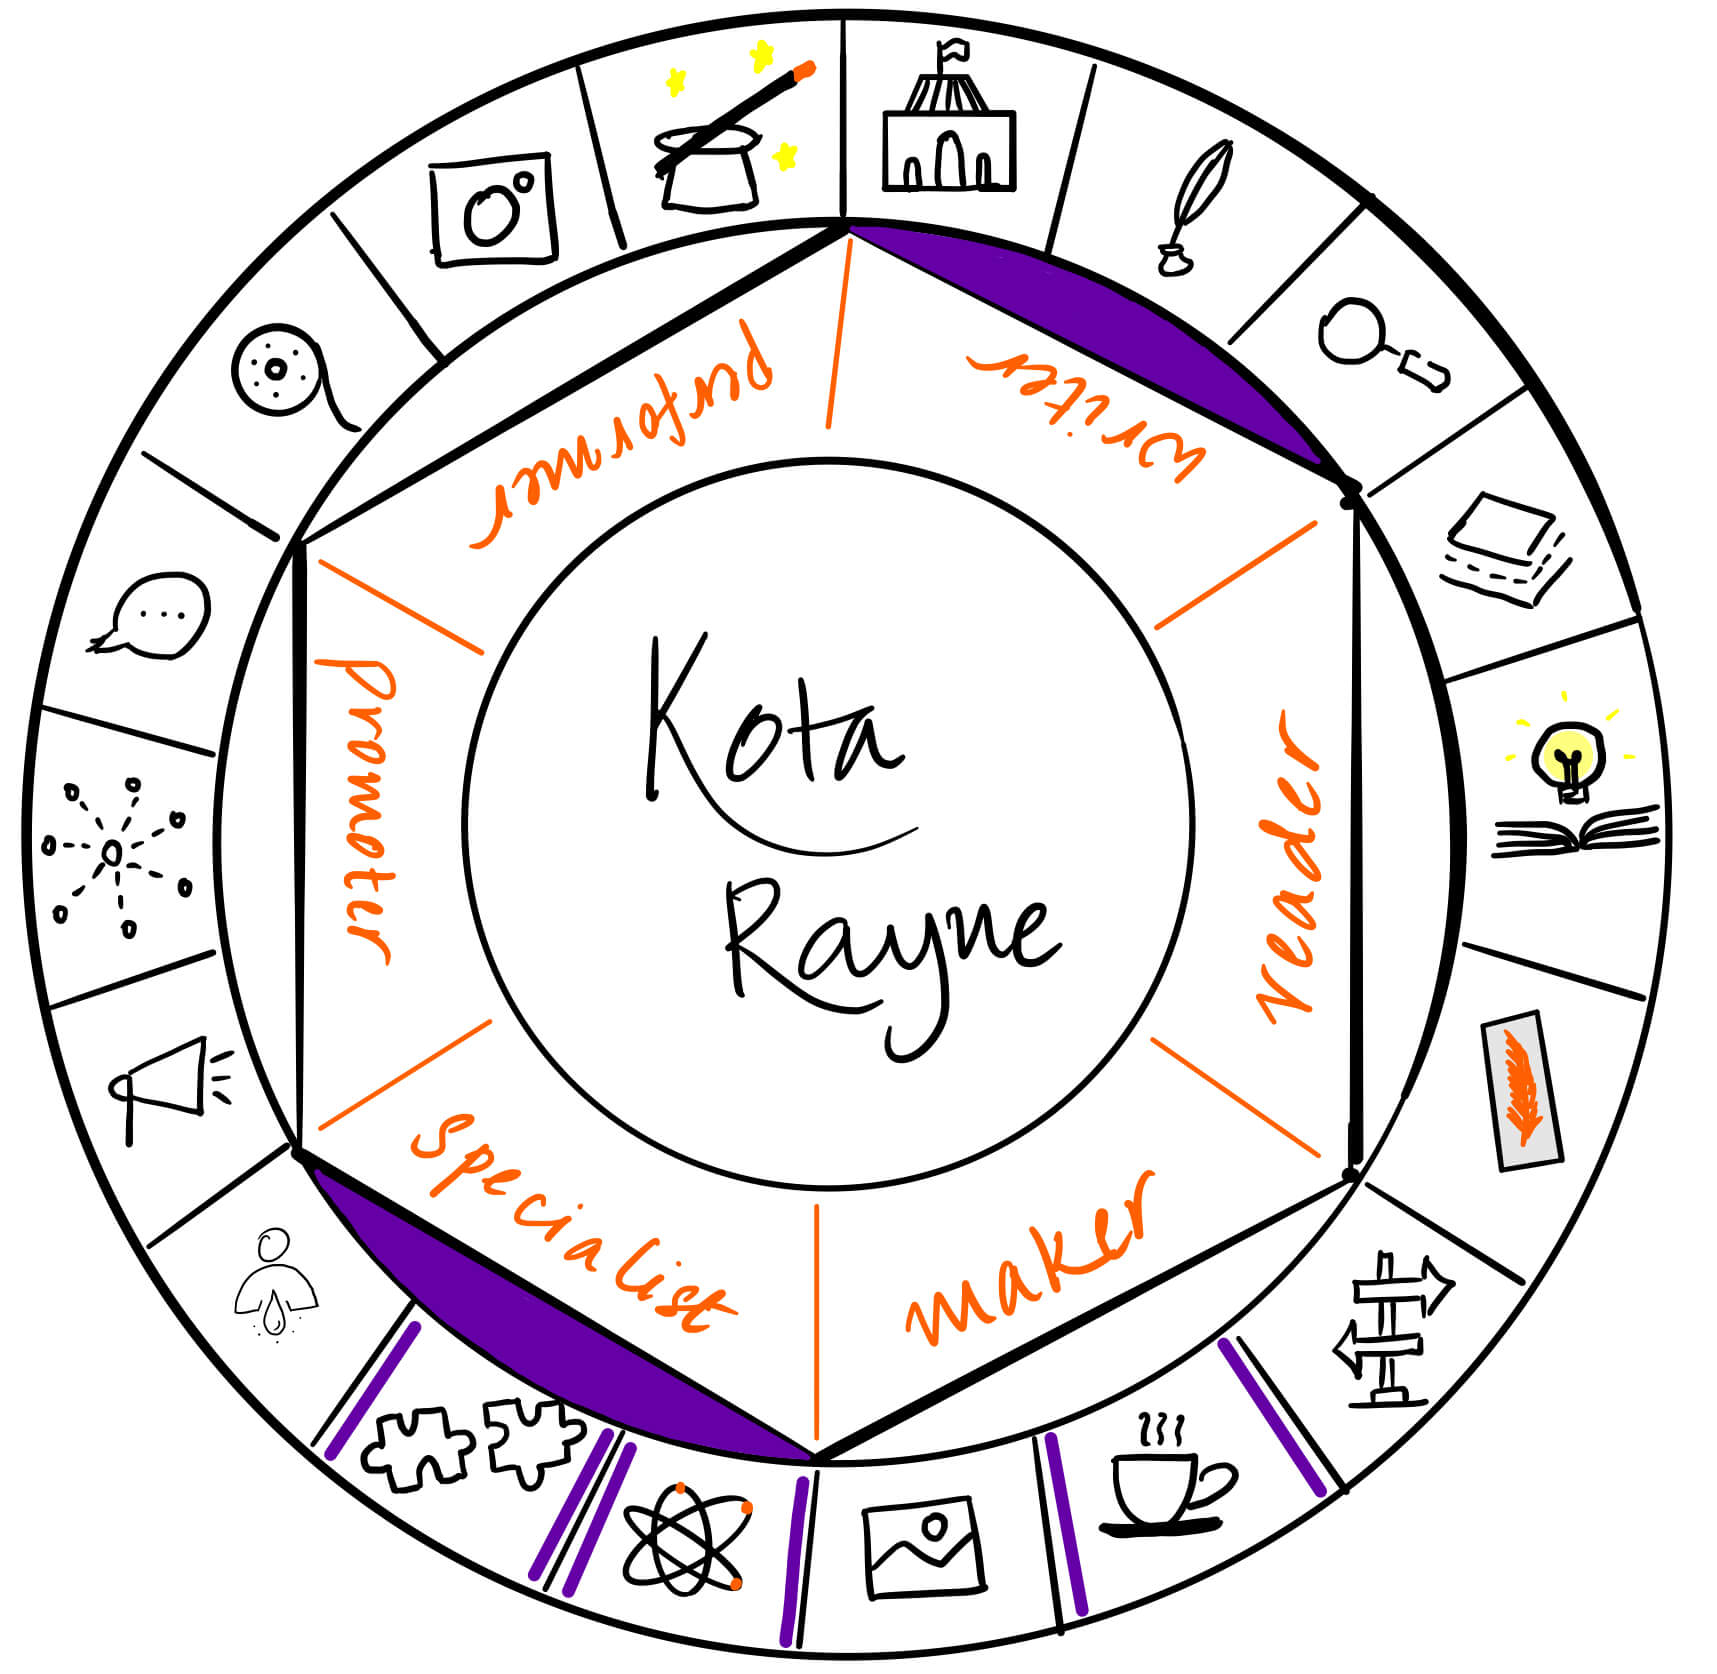 Kota is a specialist and writer. It's a pleasure to have her over on The Creator's Roulette to learn about how an anthology gets published.